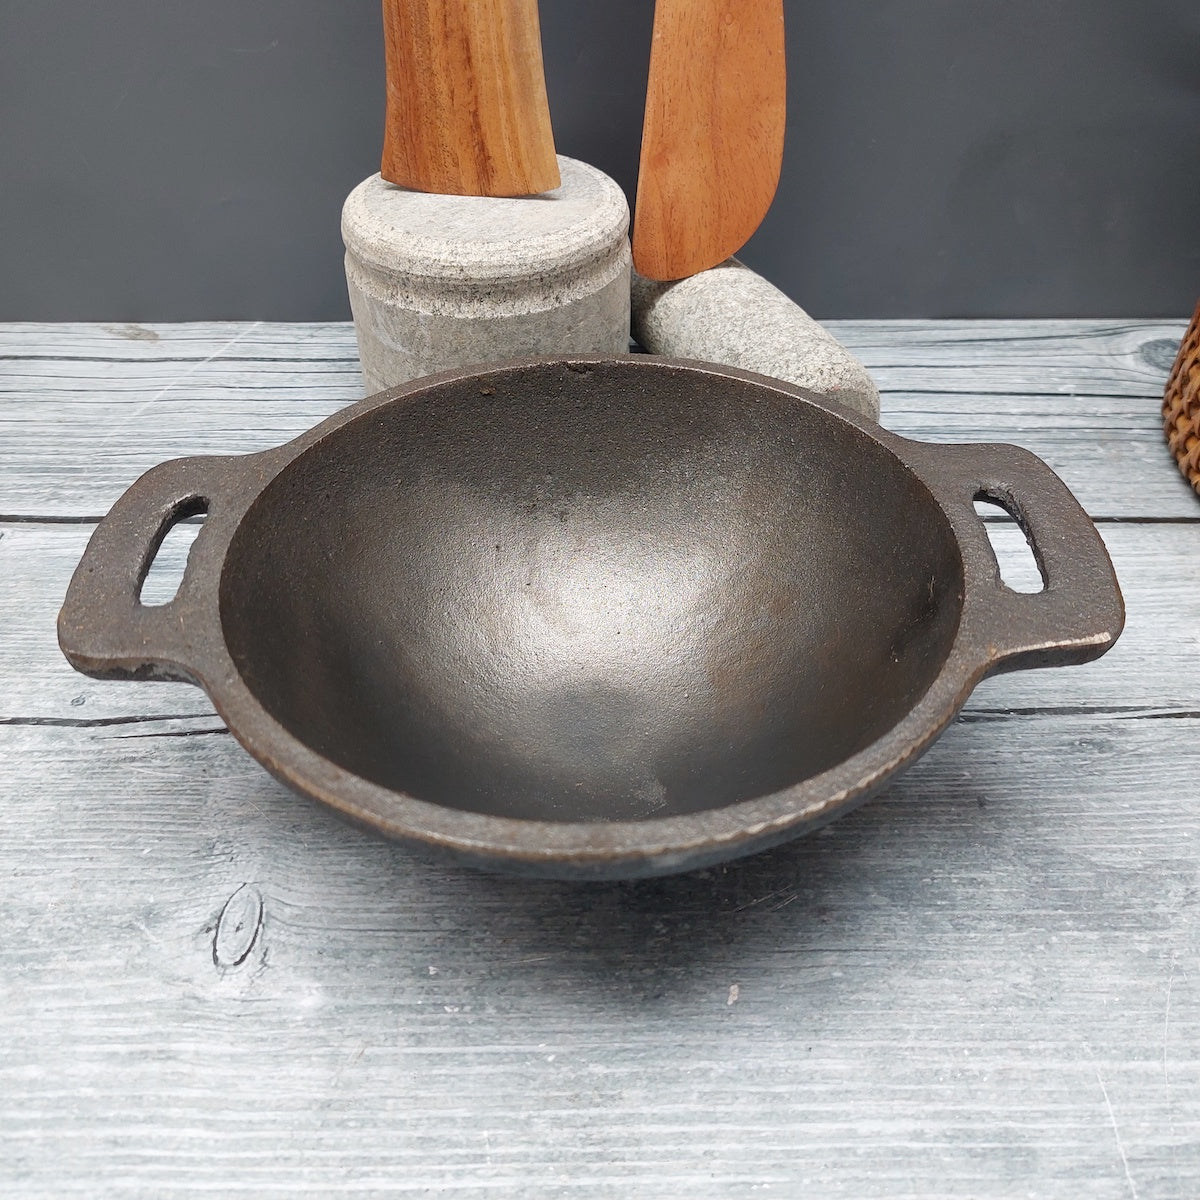 The Ultimate Guide to Caring for Your Traditional Indian Cookware